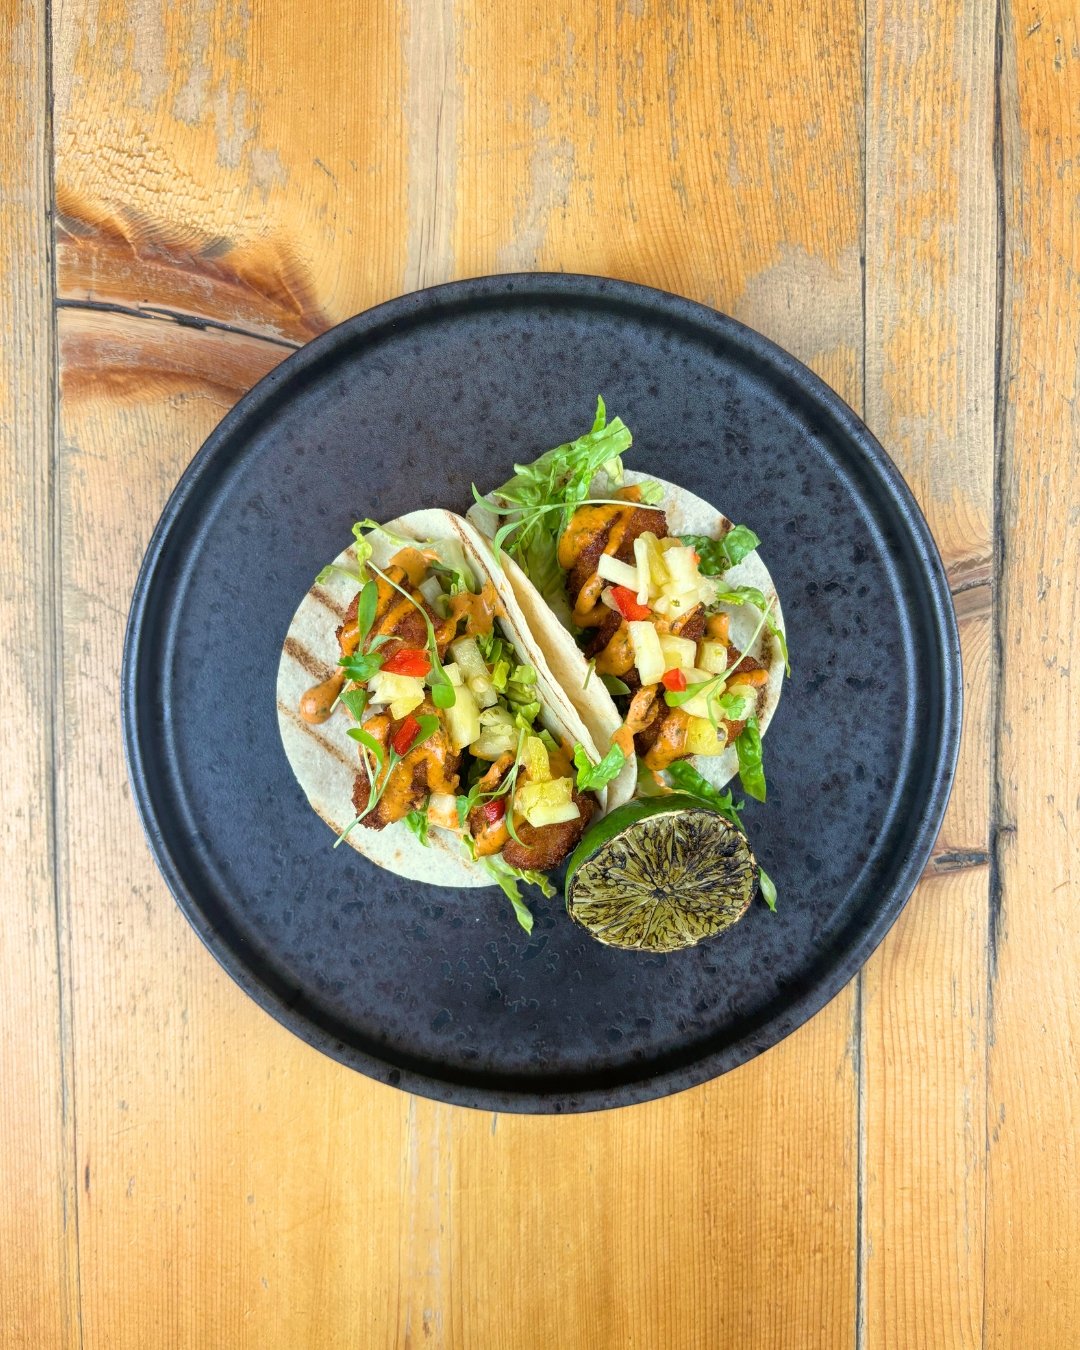 Crispy monkfish tacos, chipotle sauce, pineapple &amp; chilli salsa 🌶️

🍲 Check out our menu and book a table (links in bio)